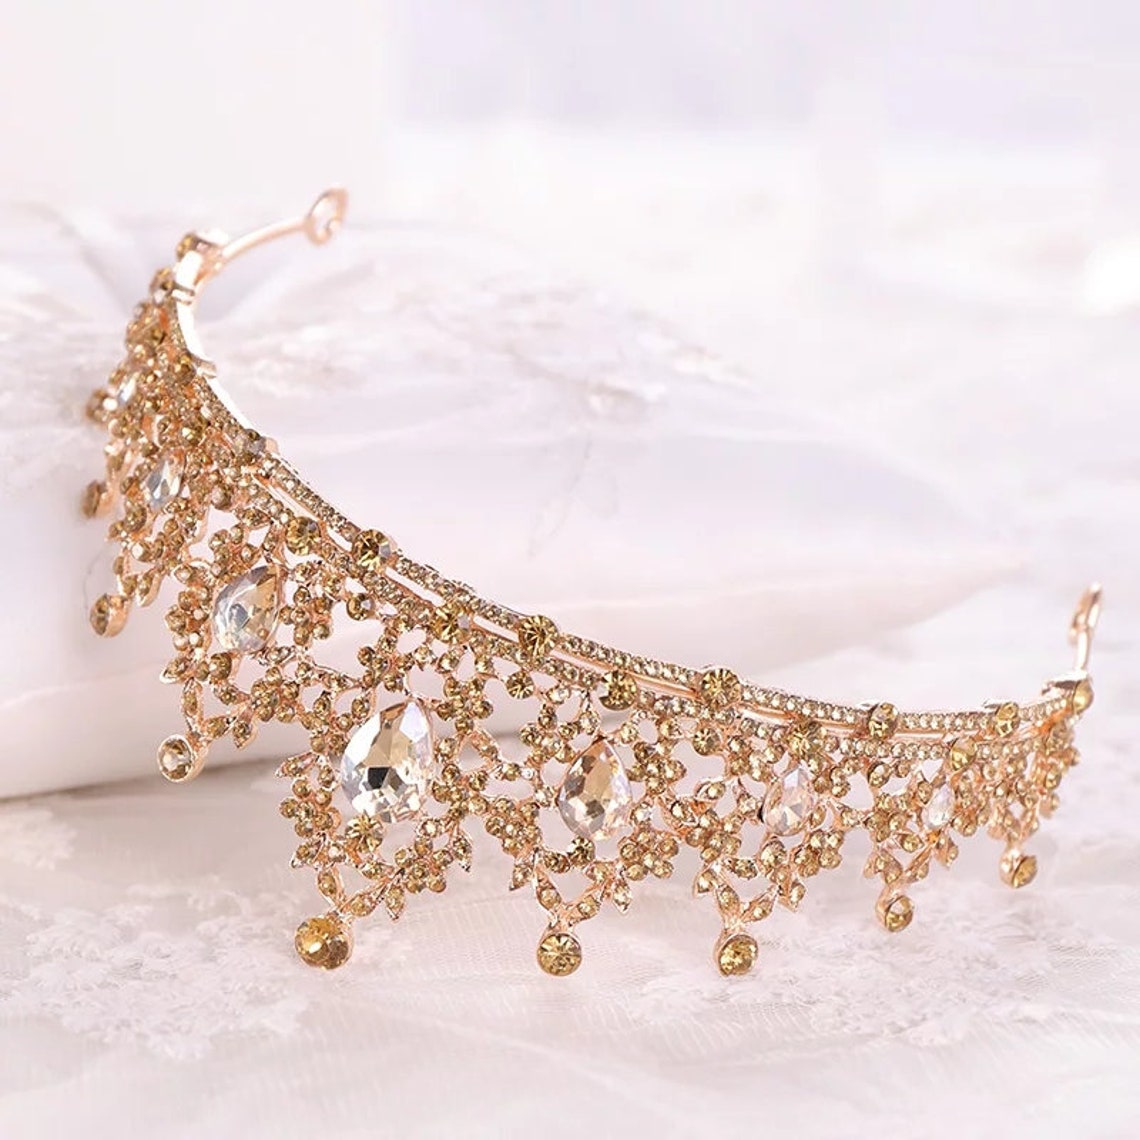 Baroque Gold Champagne Crystal Heart Bridal Tiaras Crown - Etsy